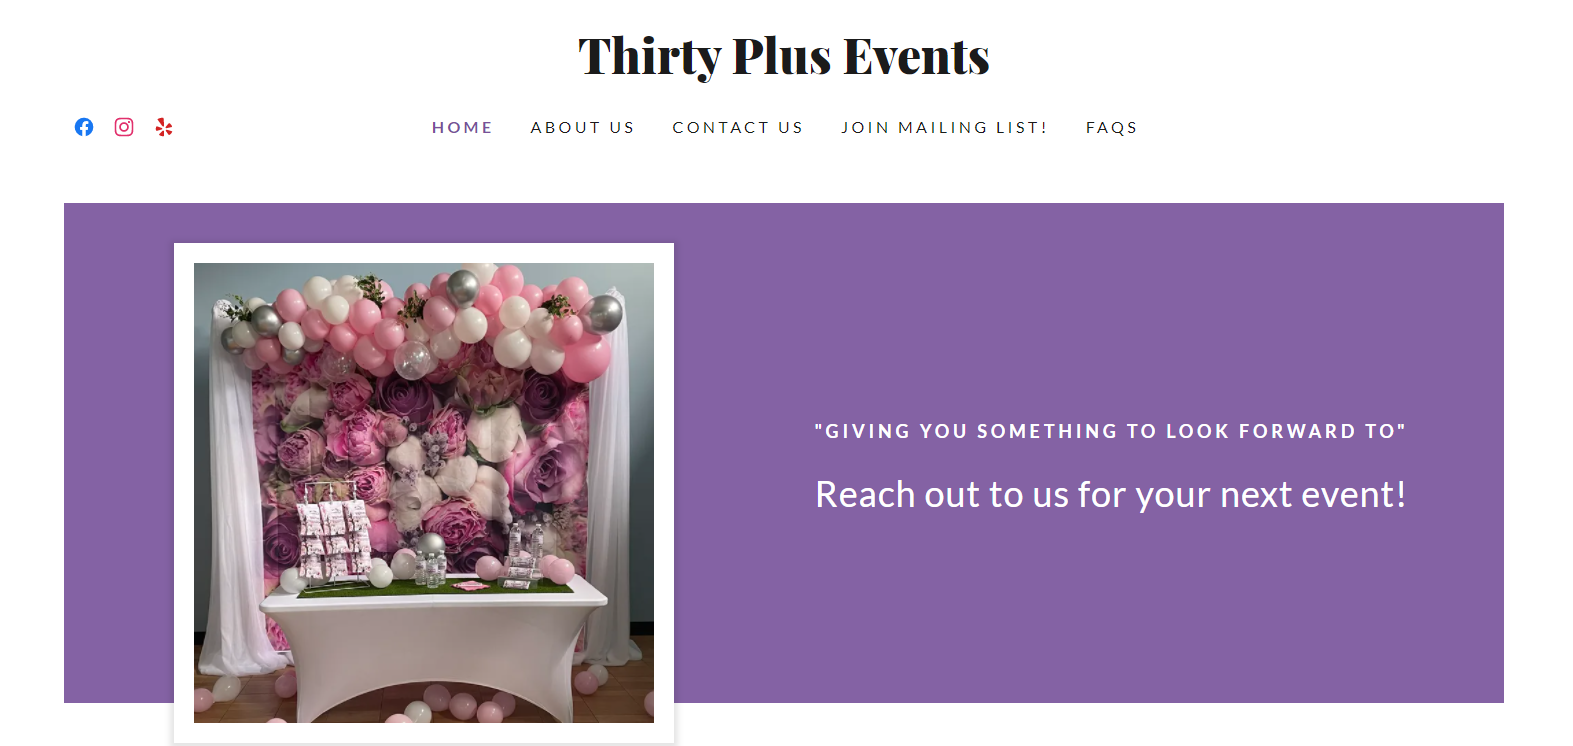 Thirty Plus Events